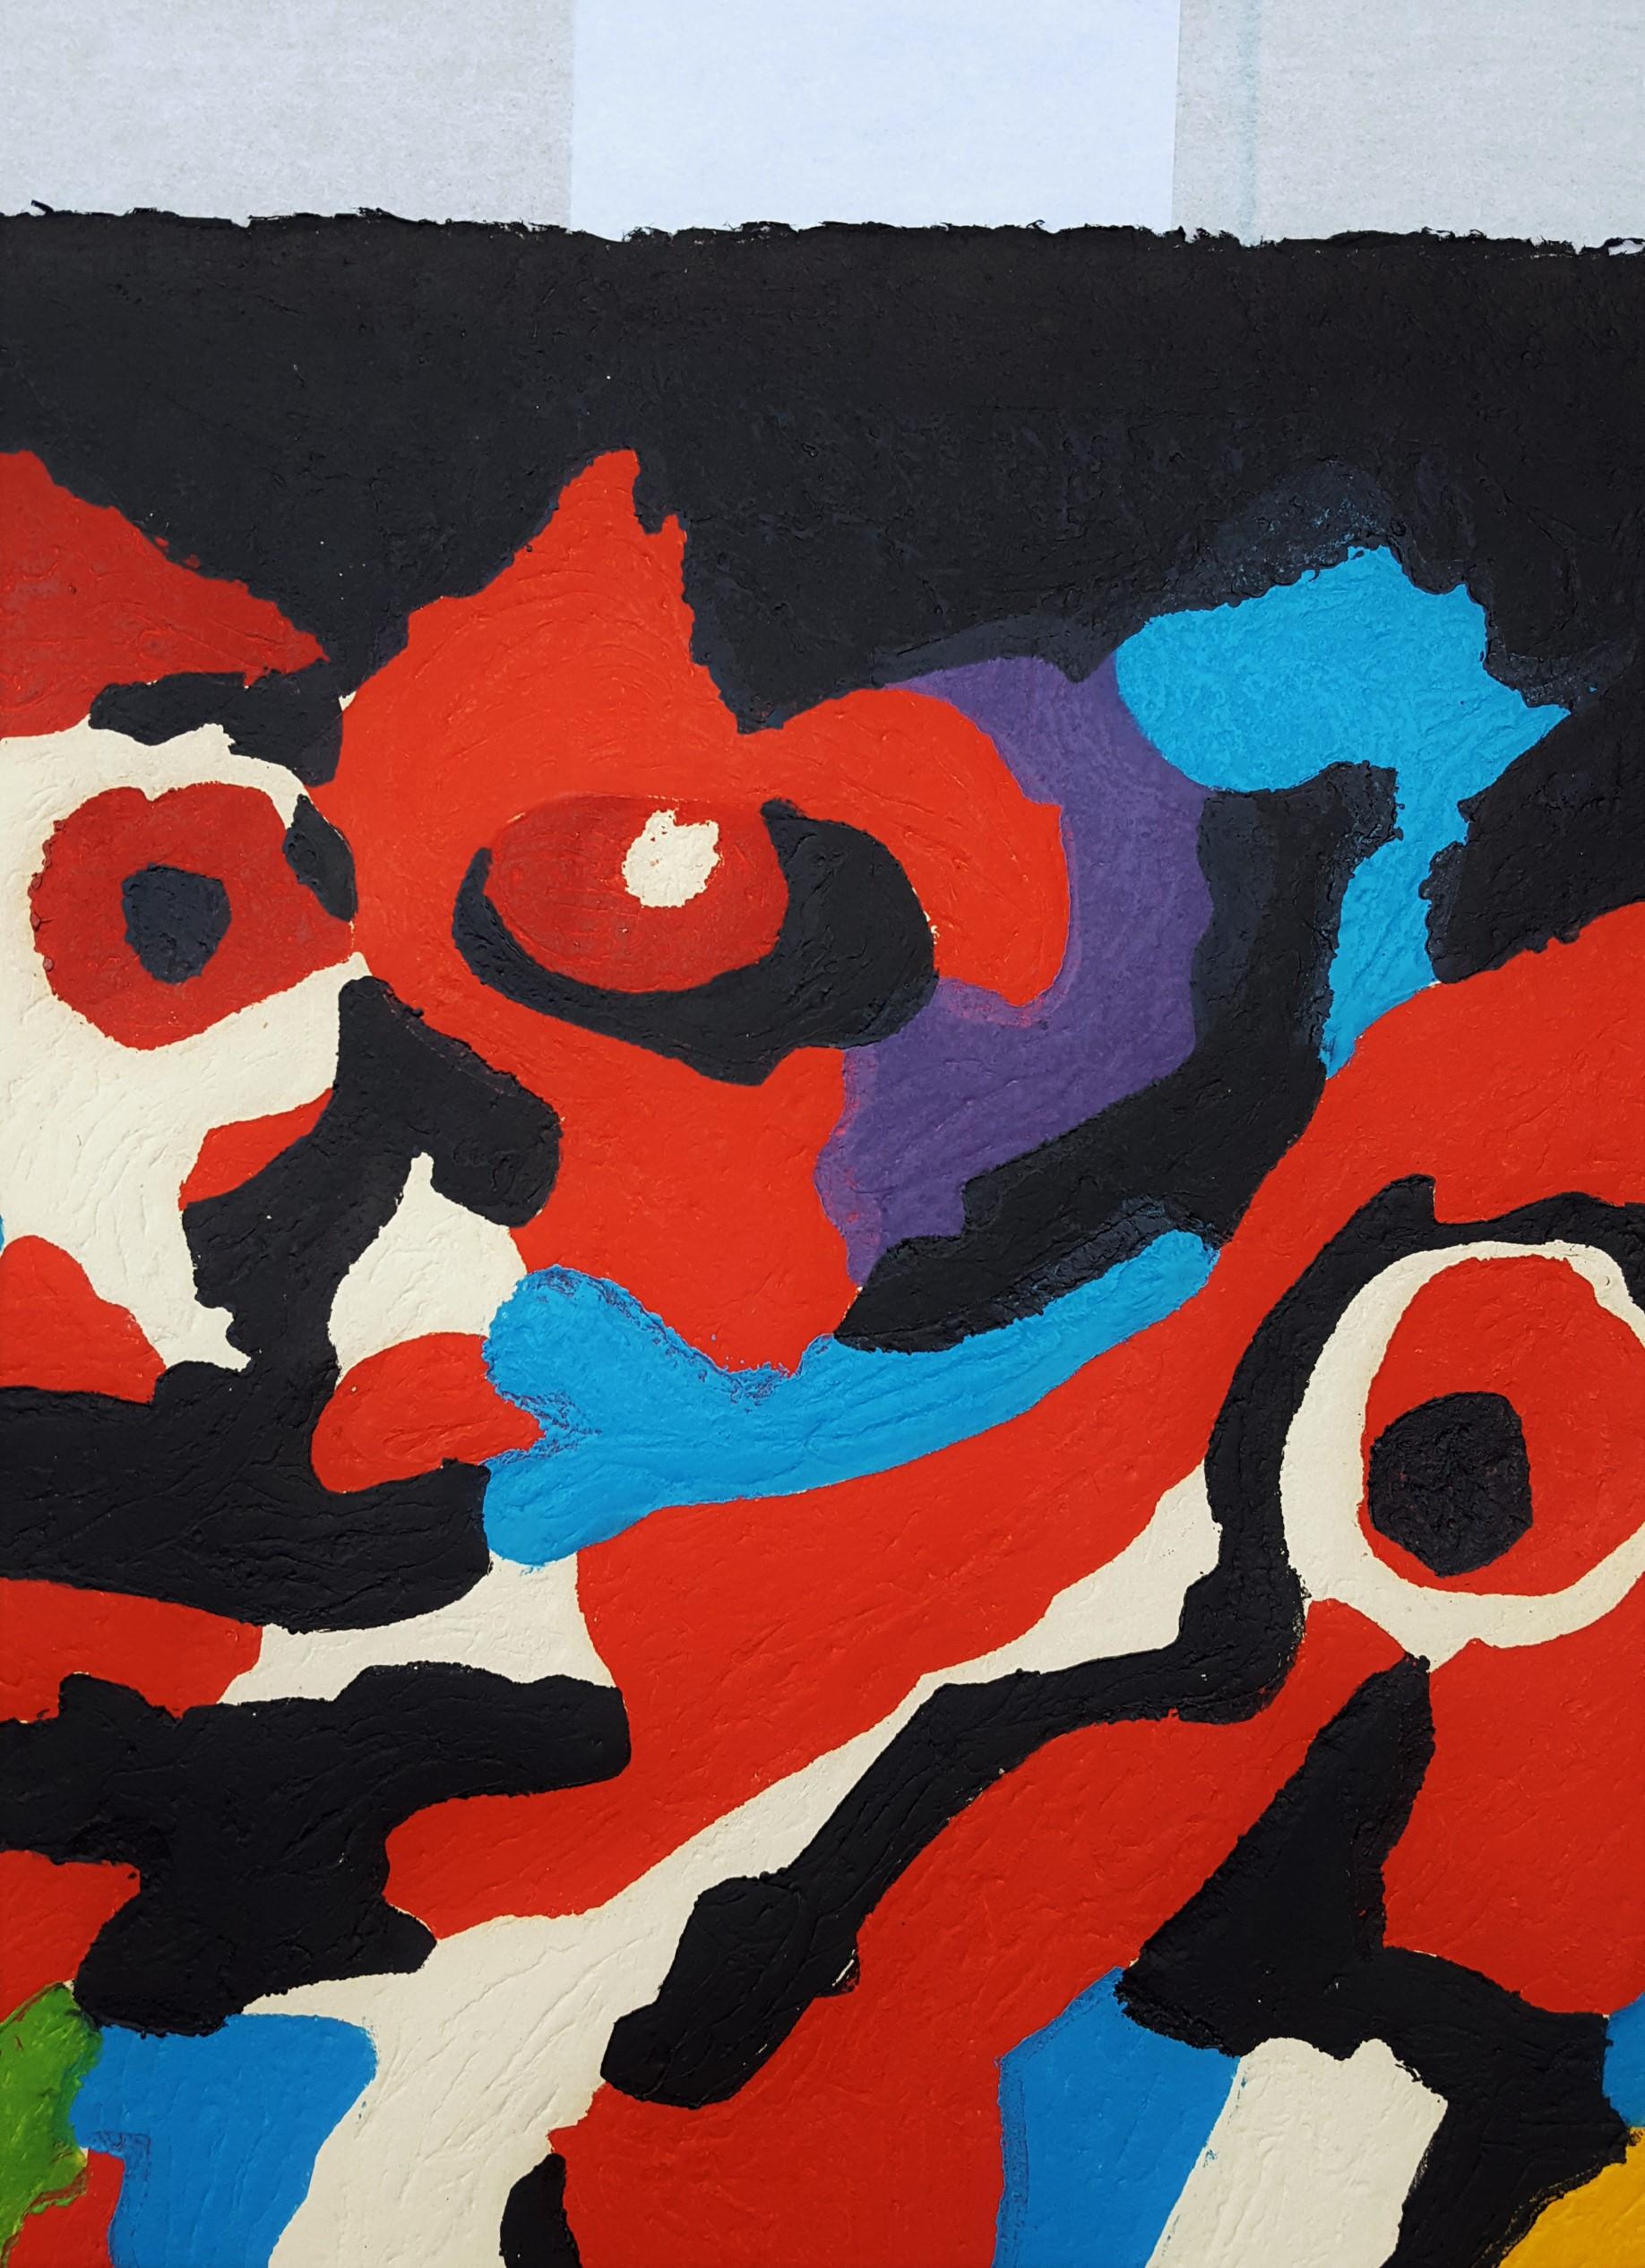 Couple in the Night - Abstract Expressionist Print by Karel Appel